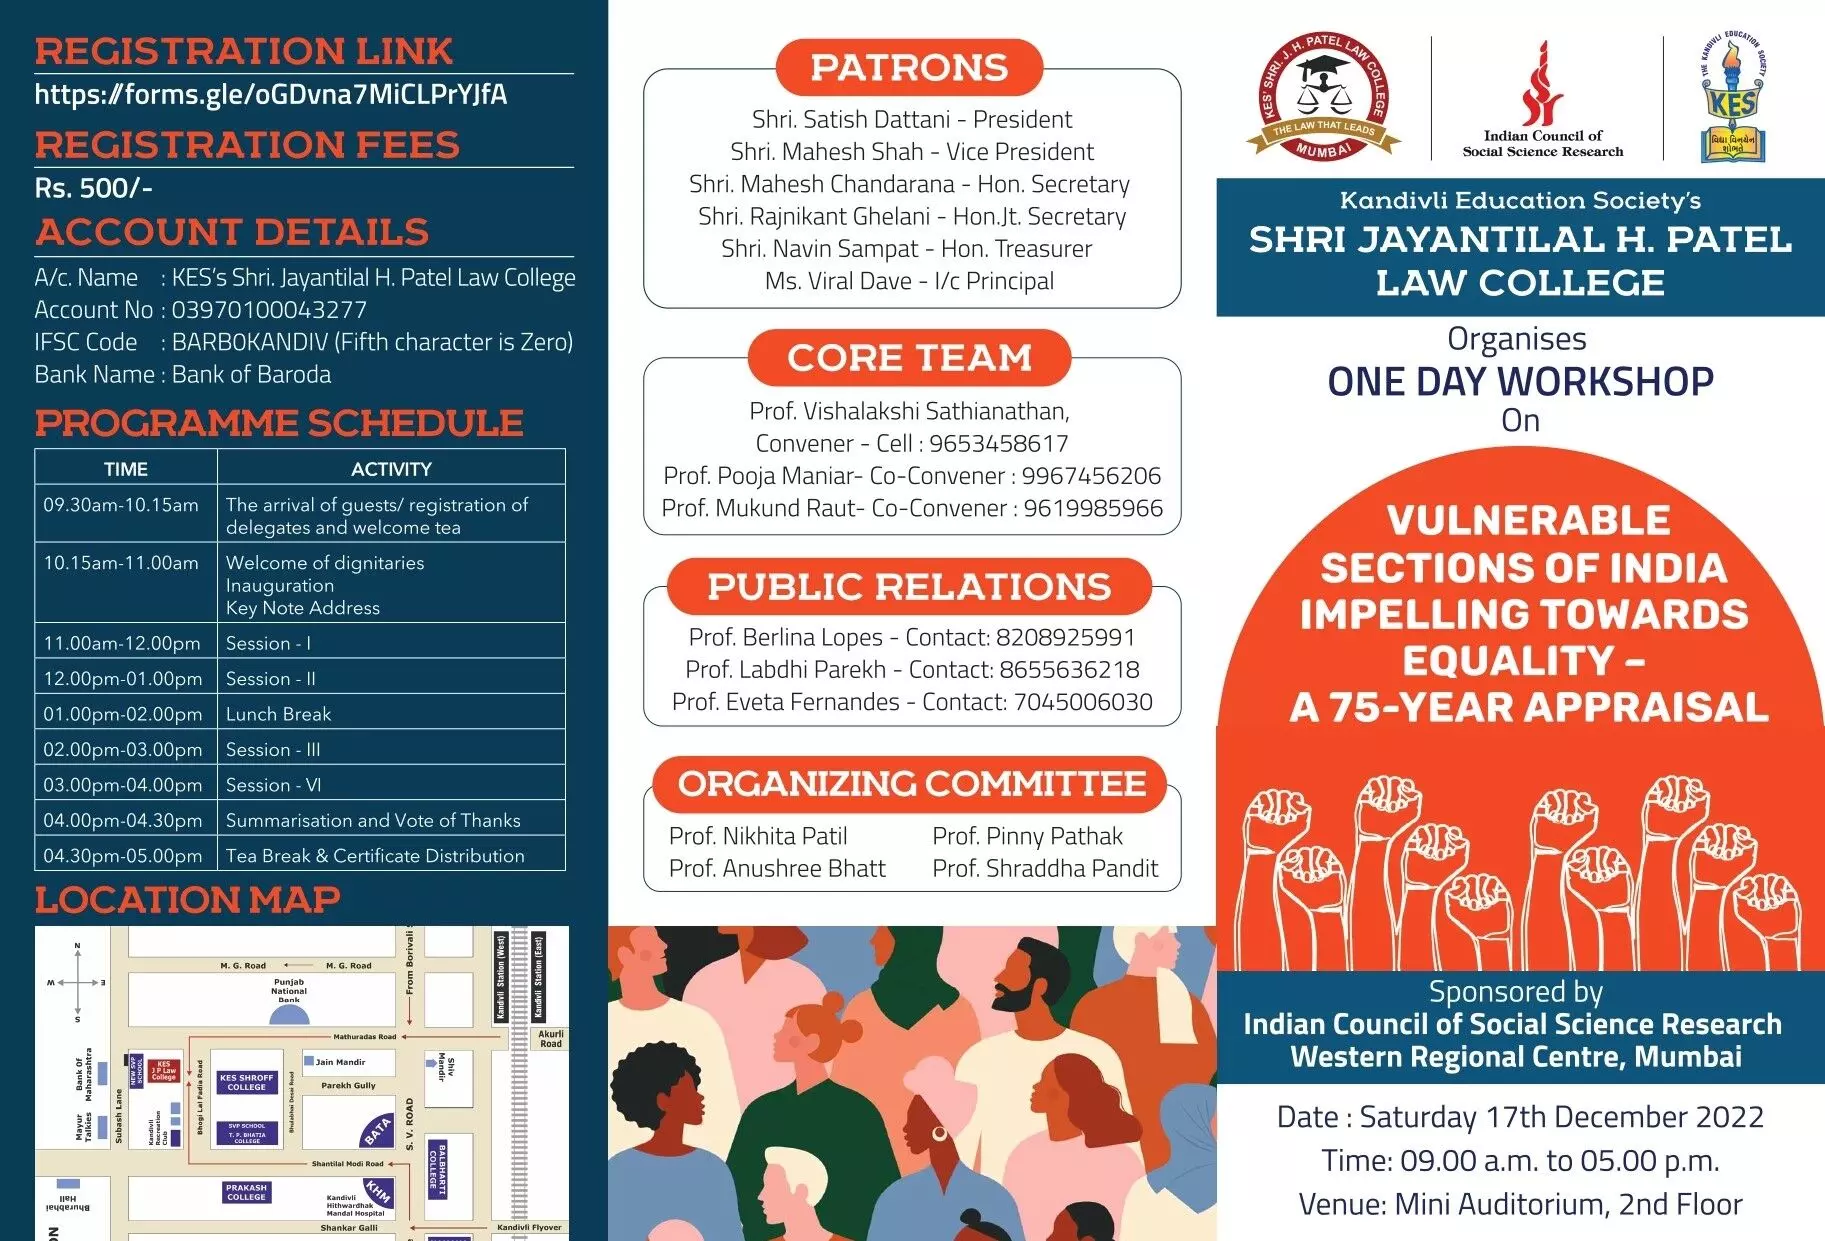 One-Day Workshop (Offline) on Vulnerable Sections of India Impelling Towards Equality- A 75-Year Appraisal | KES Shri. Jayantilal H. Patel Law College, Kandivli (West), Mumbai